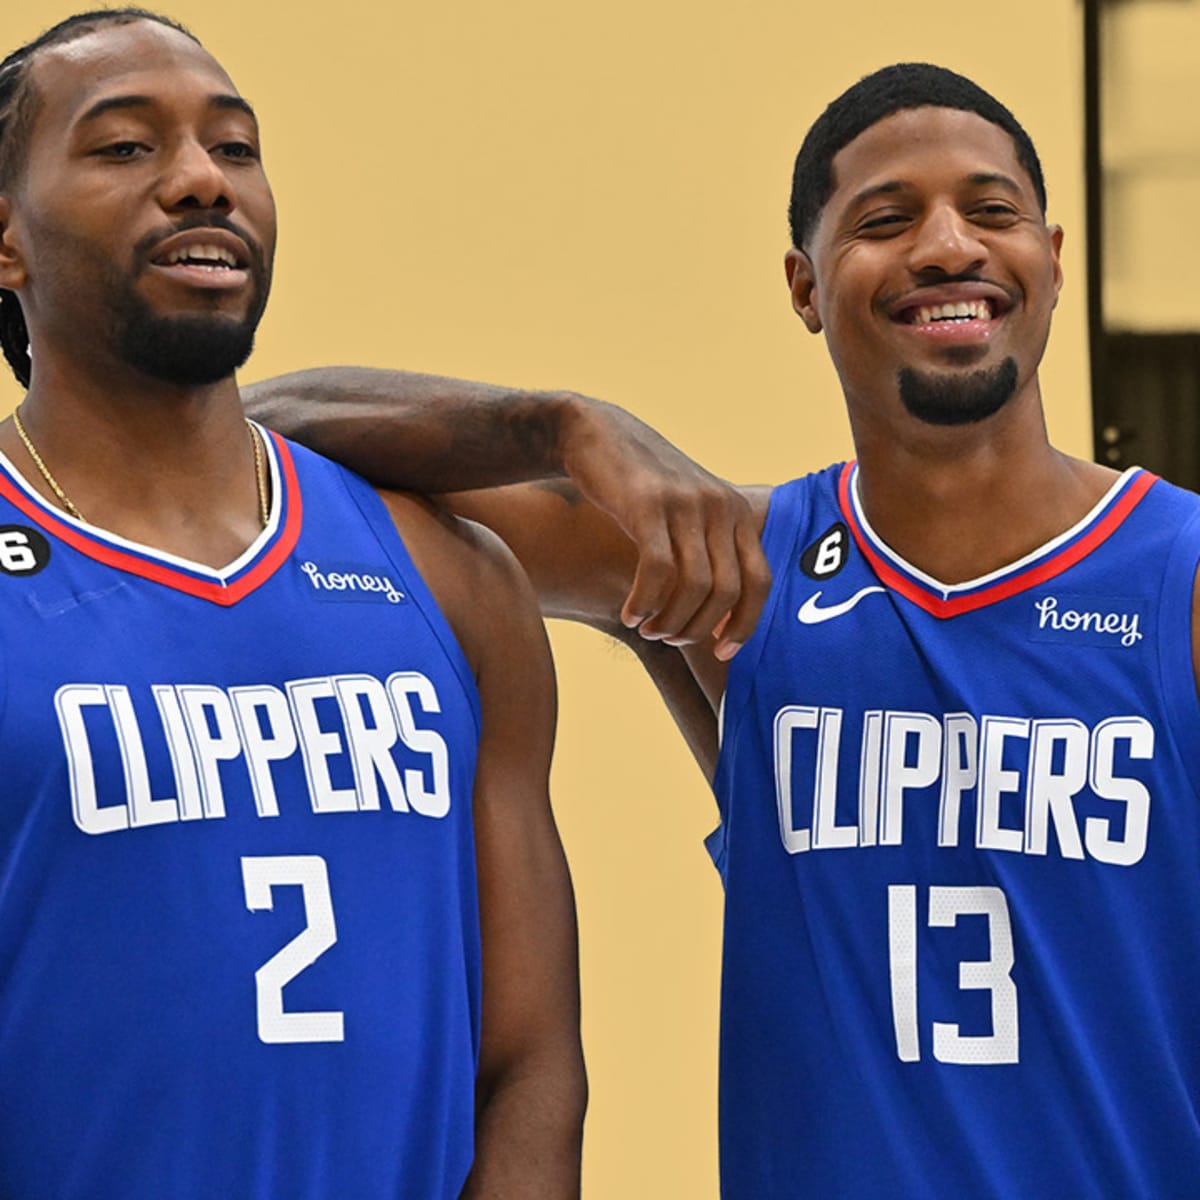 The Clippers plan for Kawhi Leonard, Paul George, Russell Westbrook